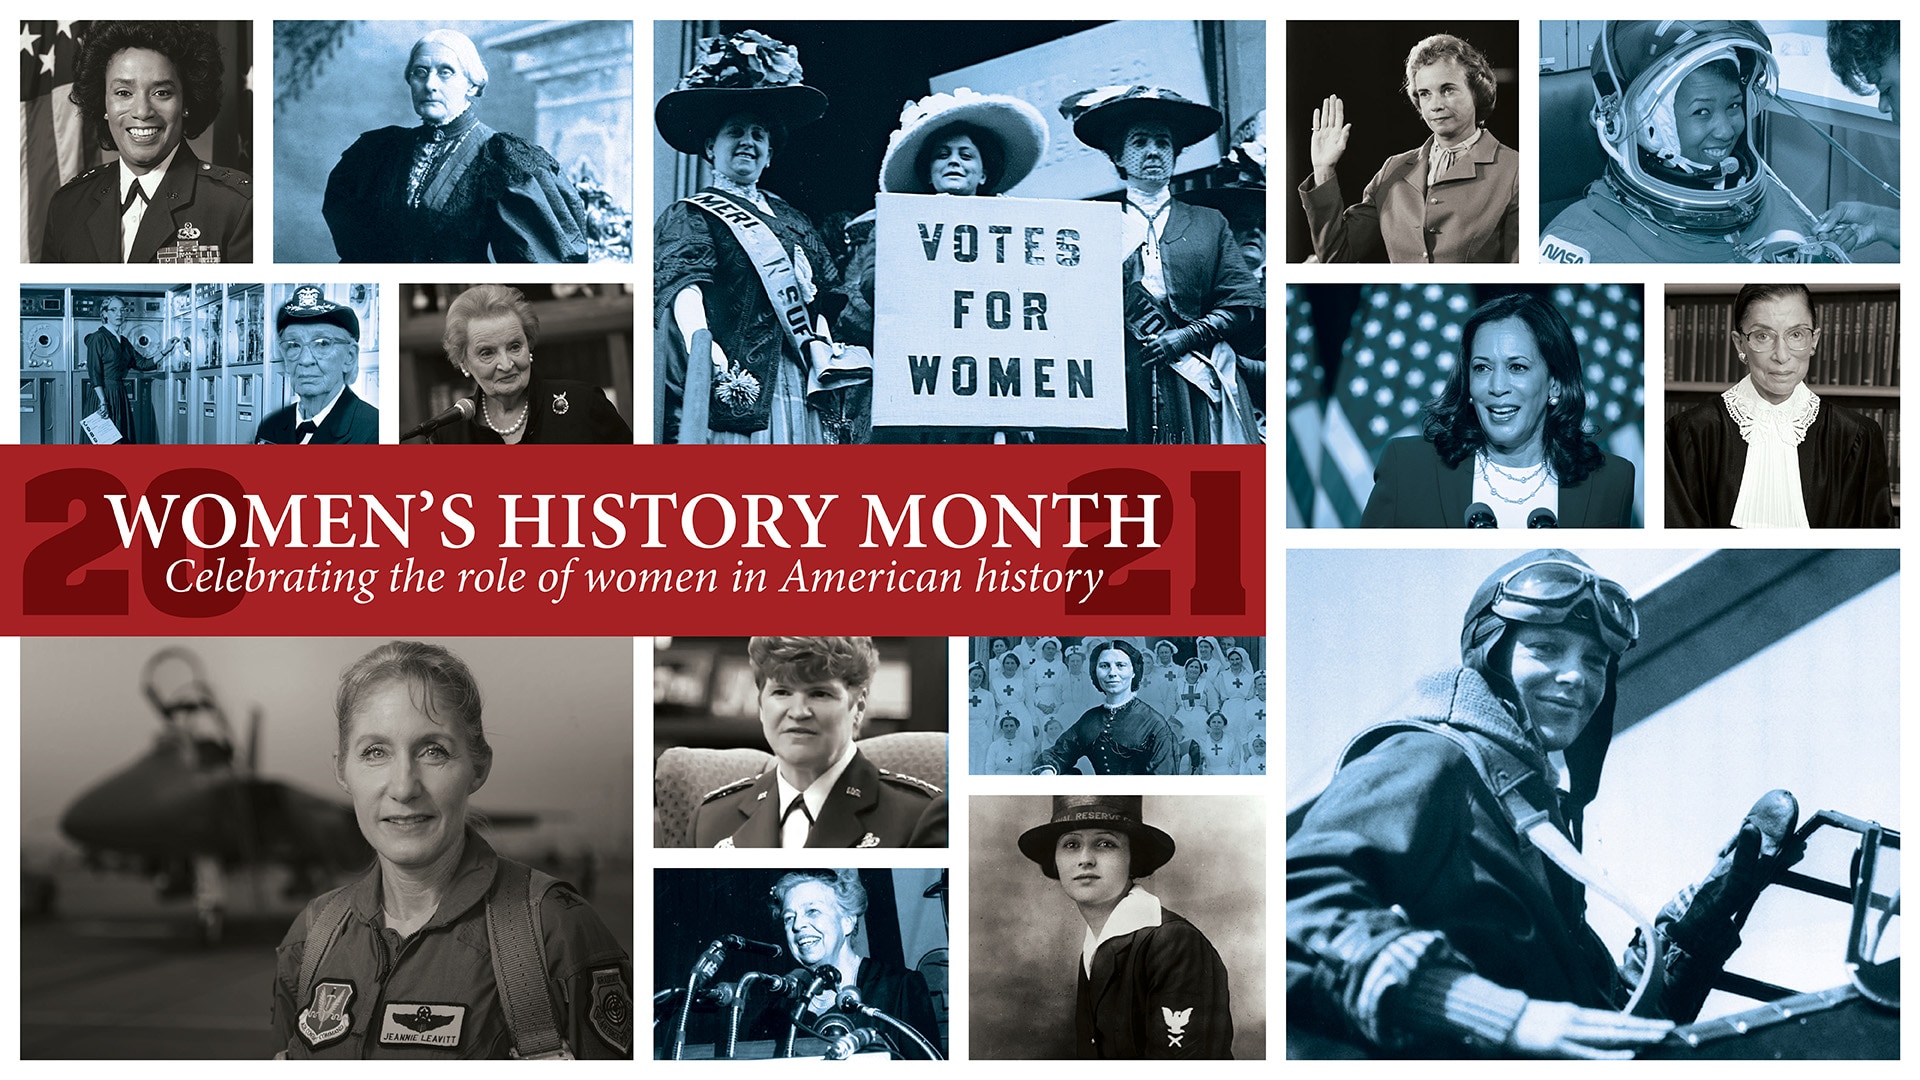 A group of small photos recognizing great women in history.